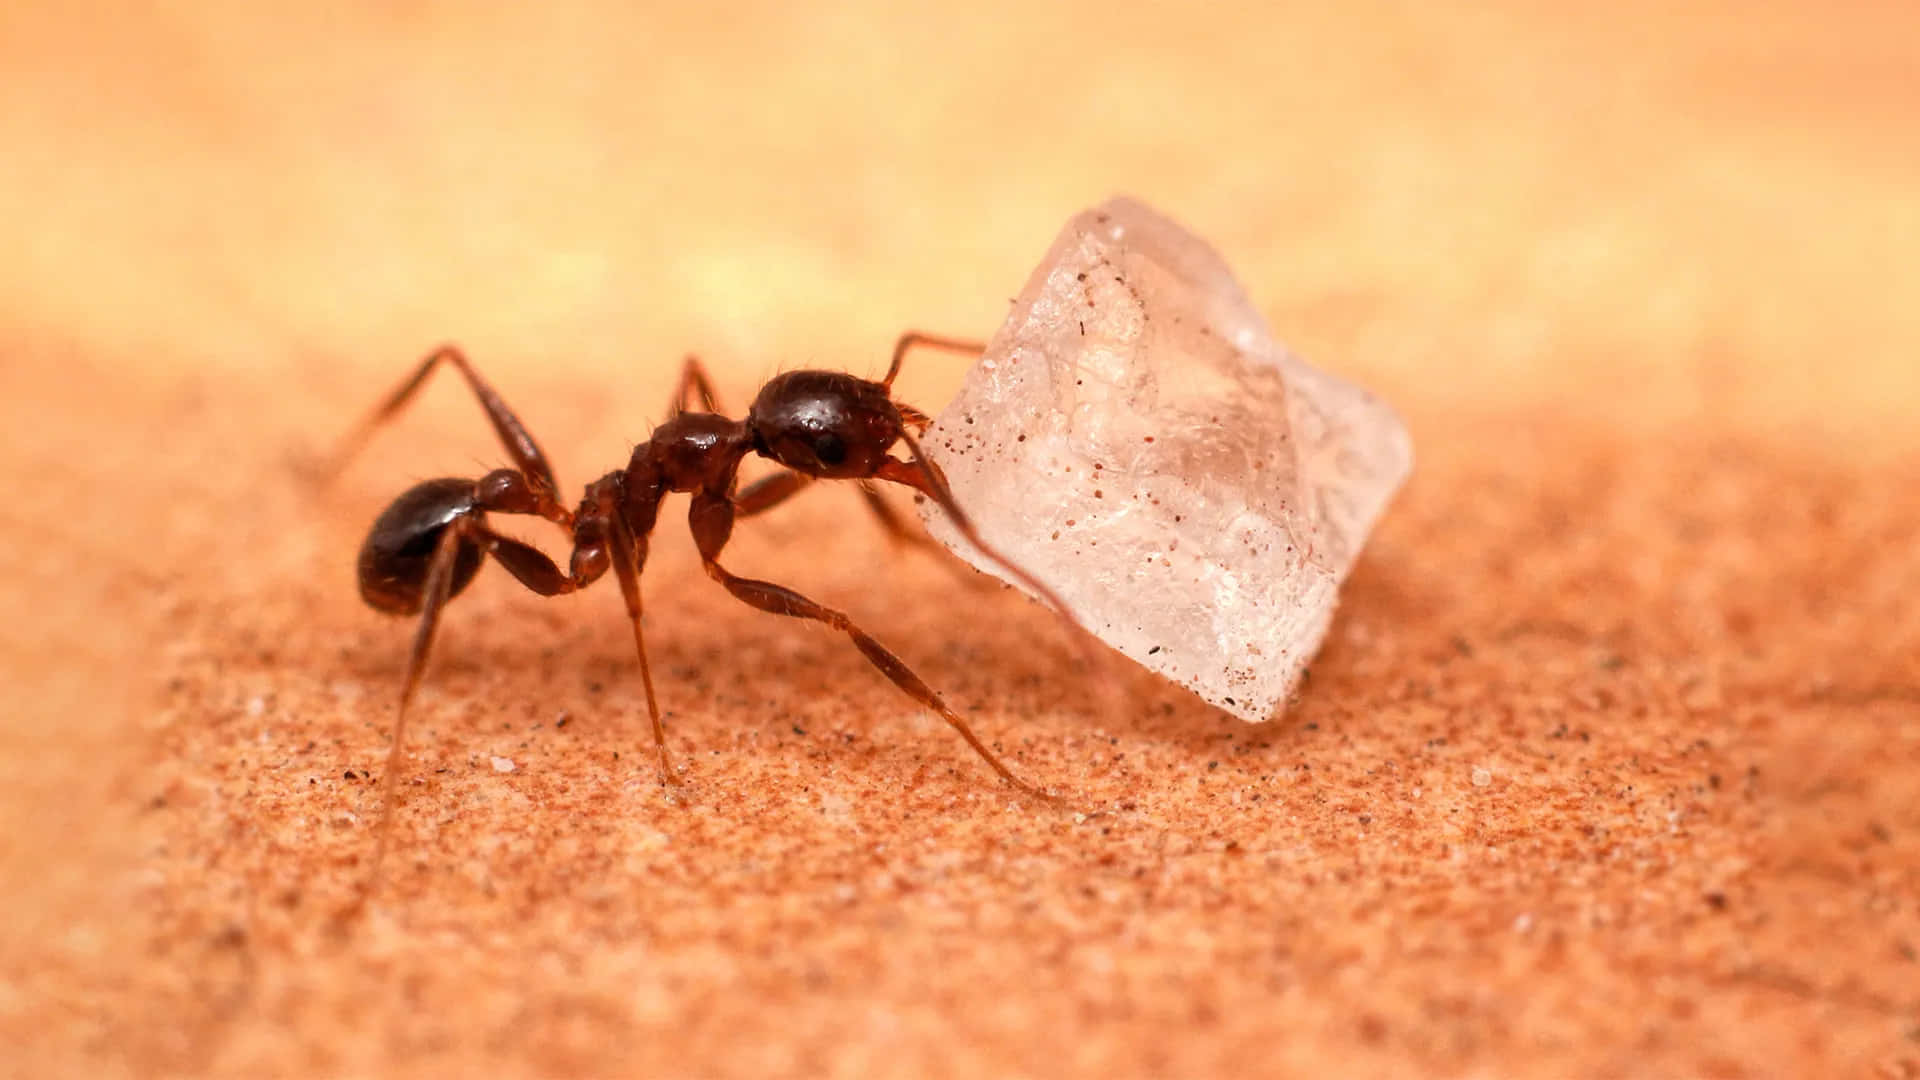 Pavement Ant Carrying Sugar Crystal Wallpaper